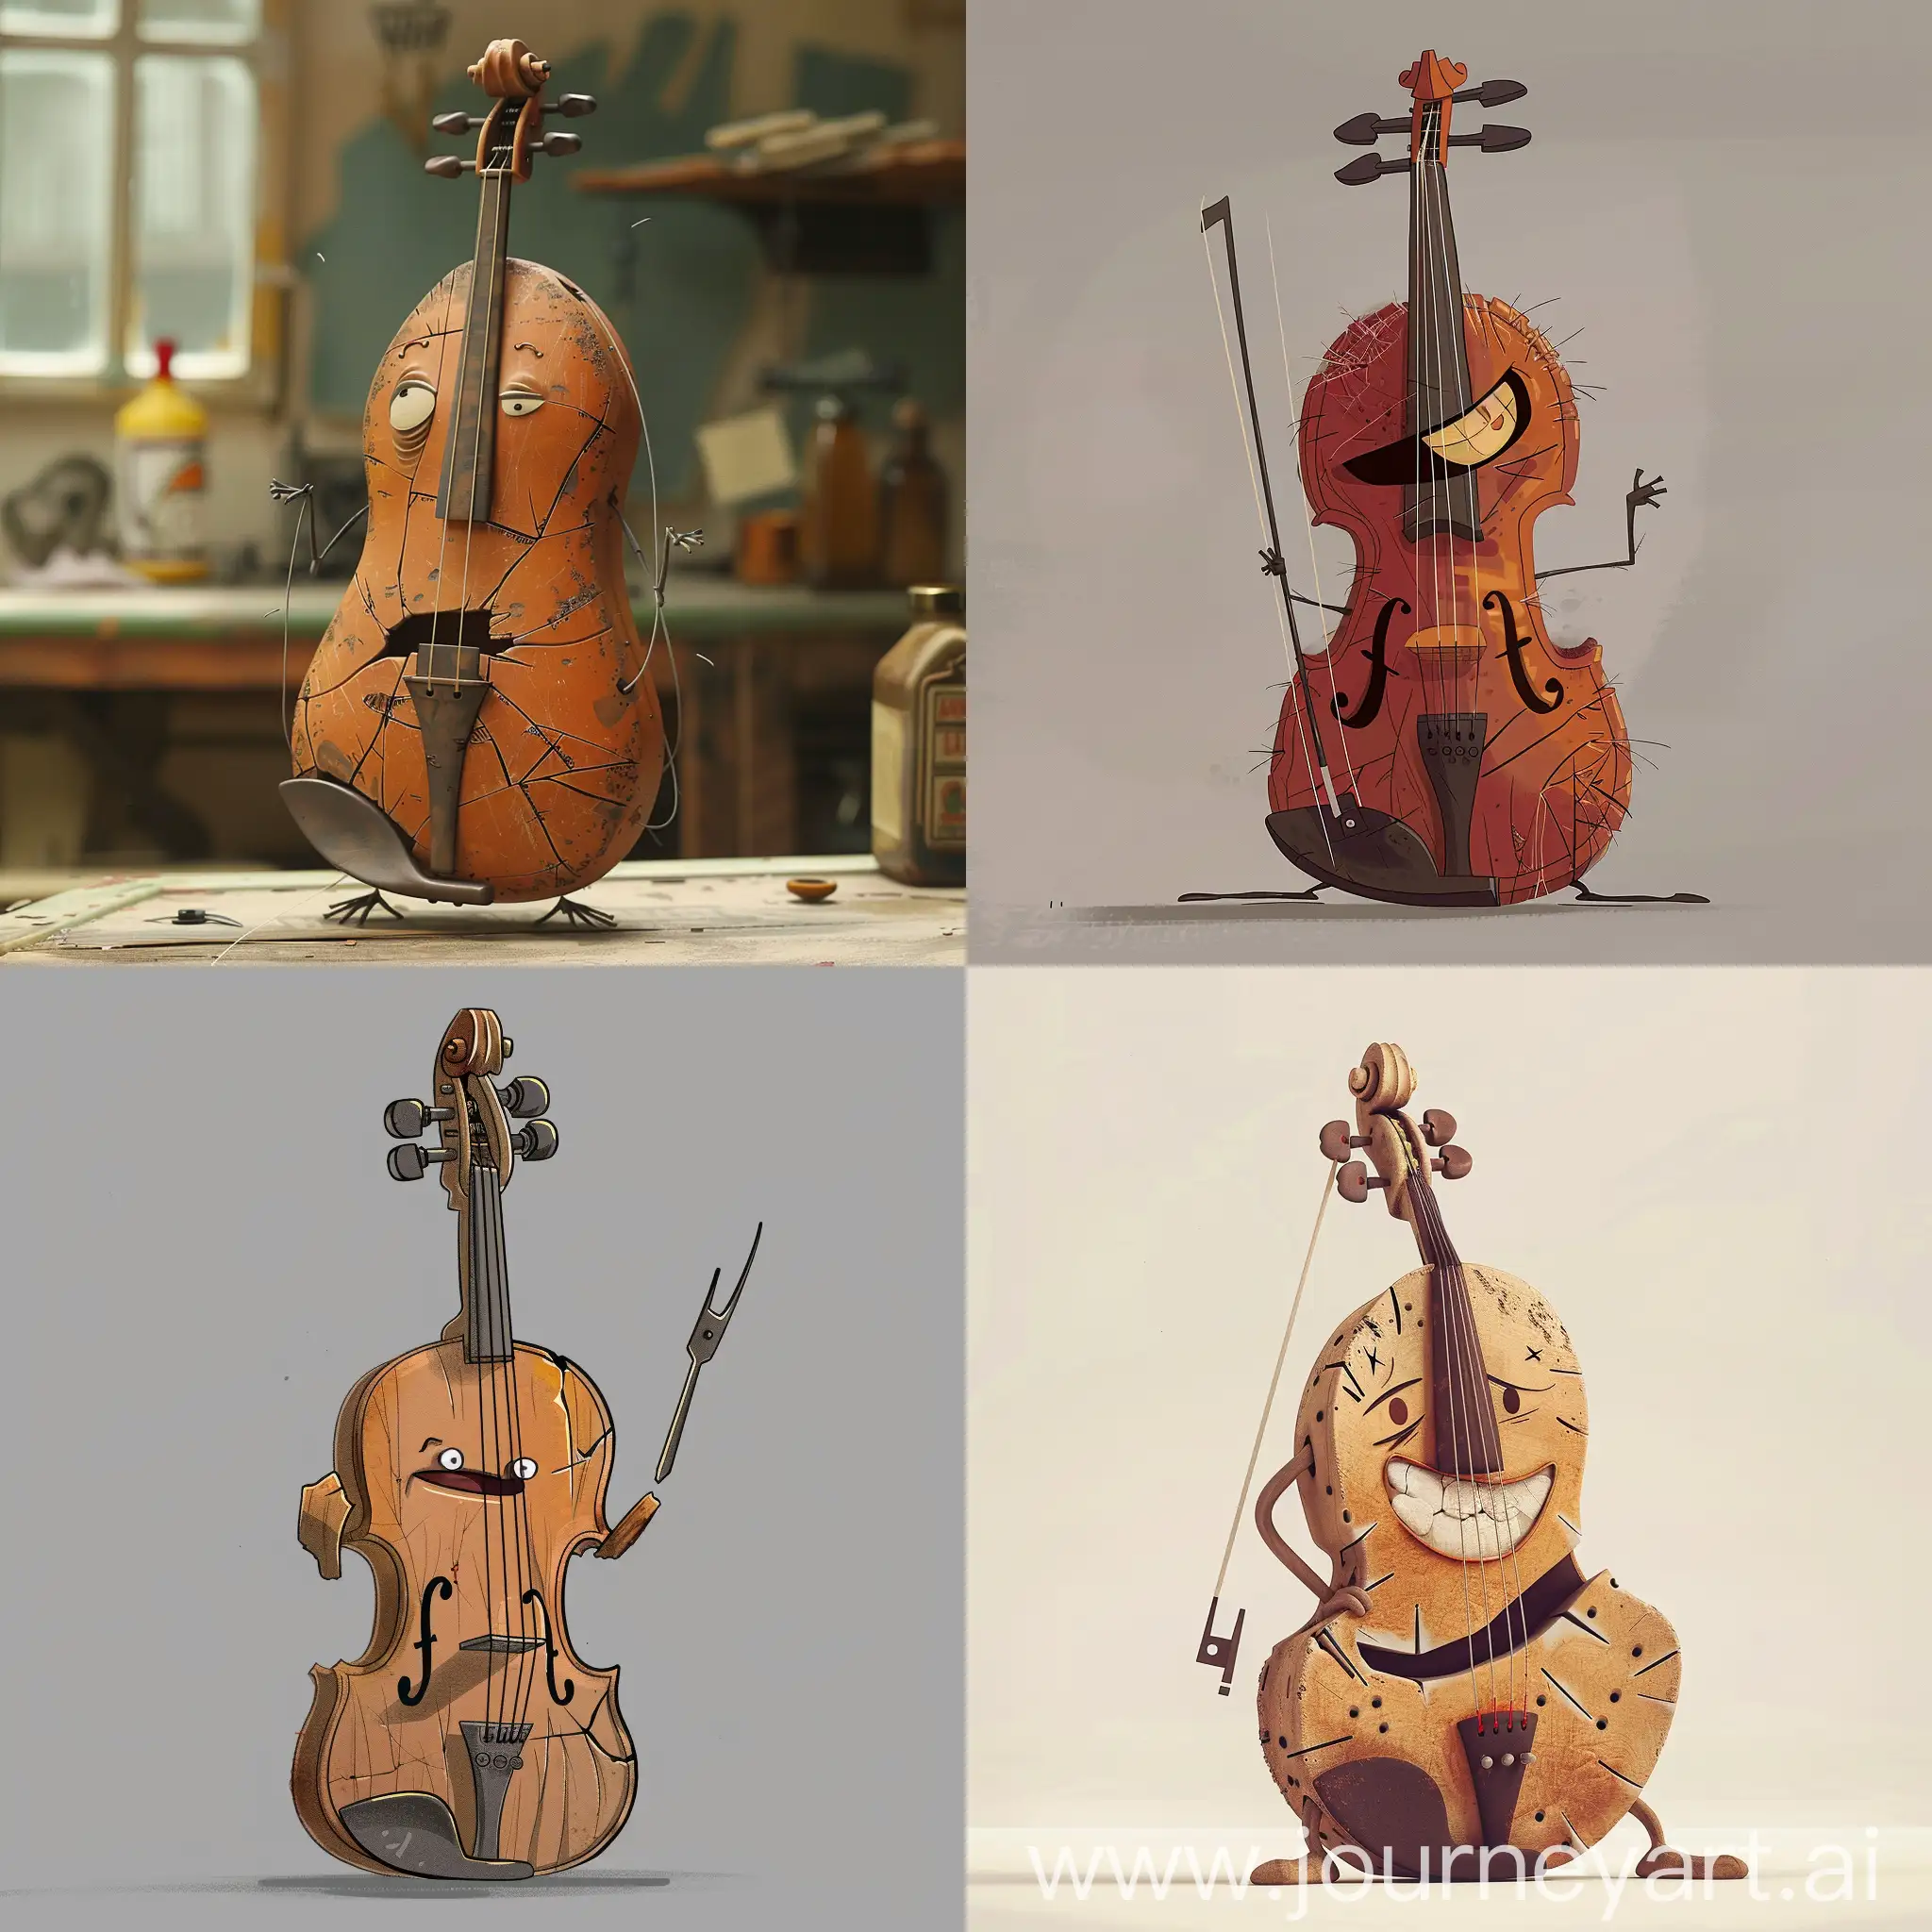 Animated-Cartoonish-Character-Broken-Violin-with-Frayed-Strings-and-Scarred-Body